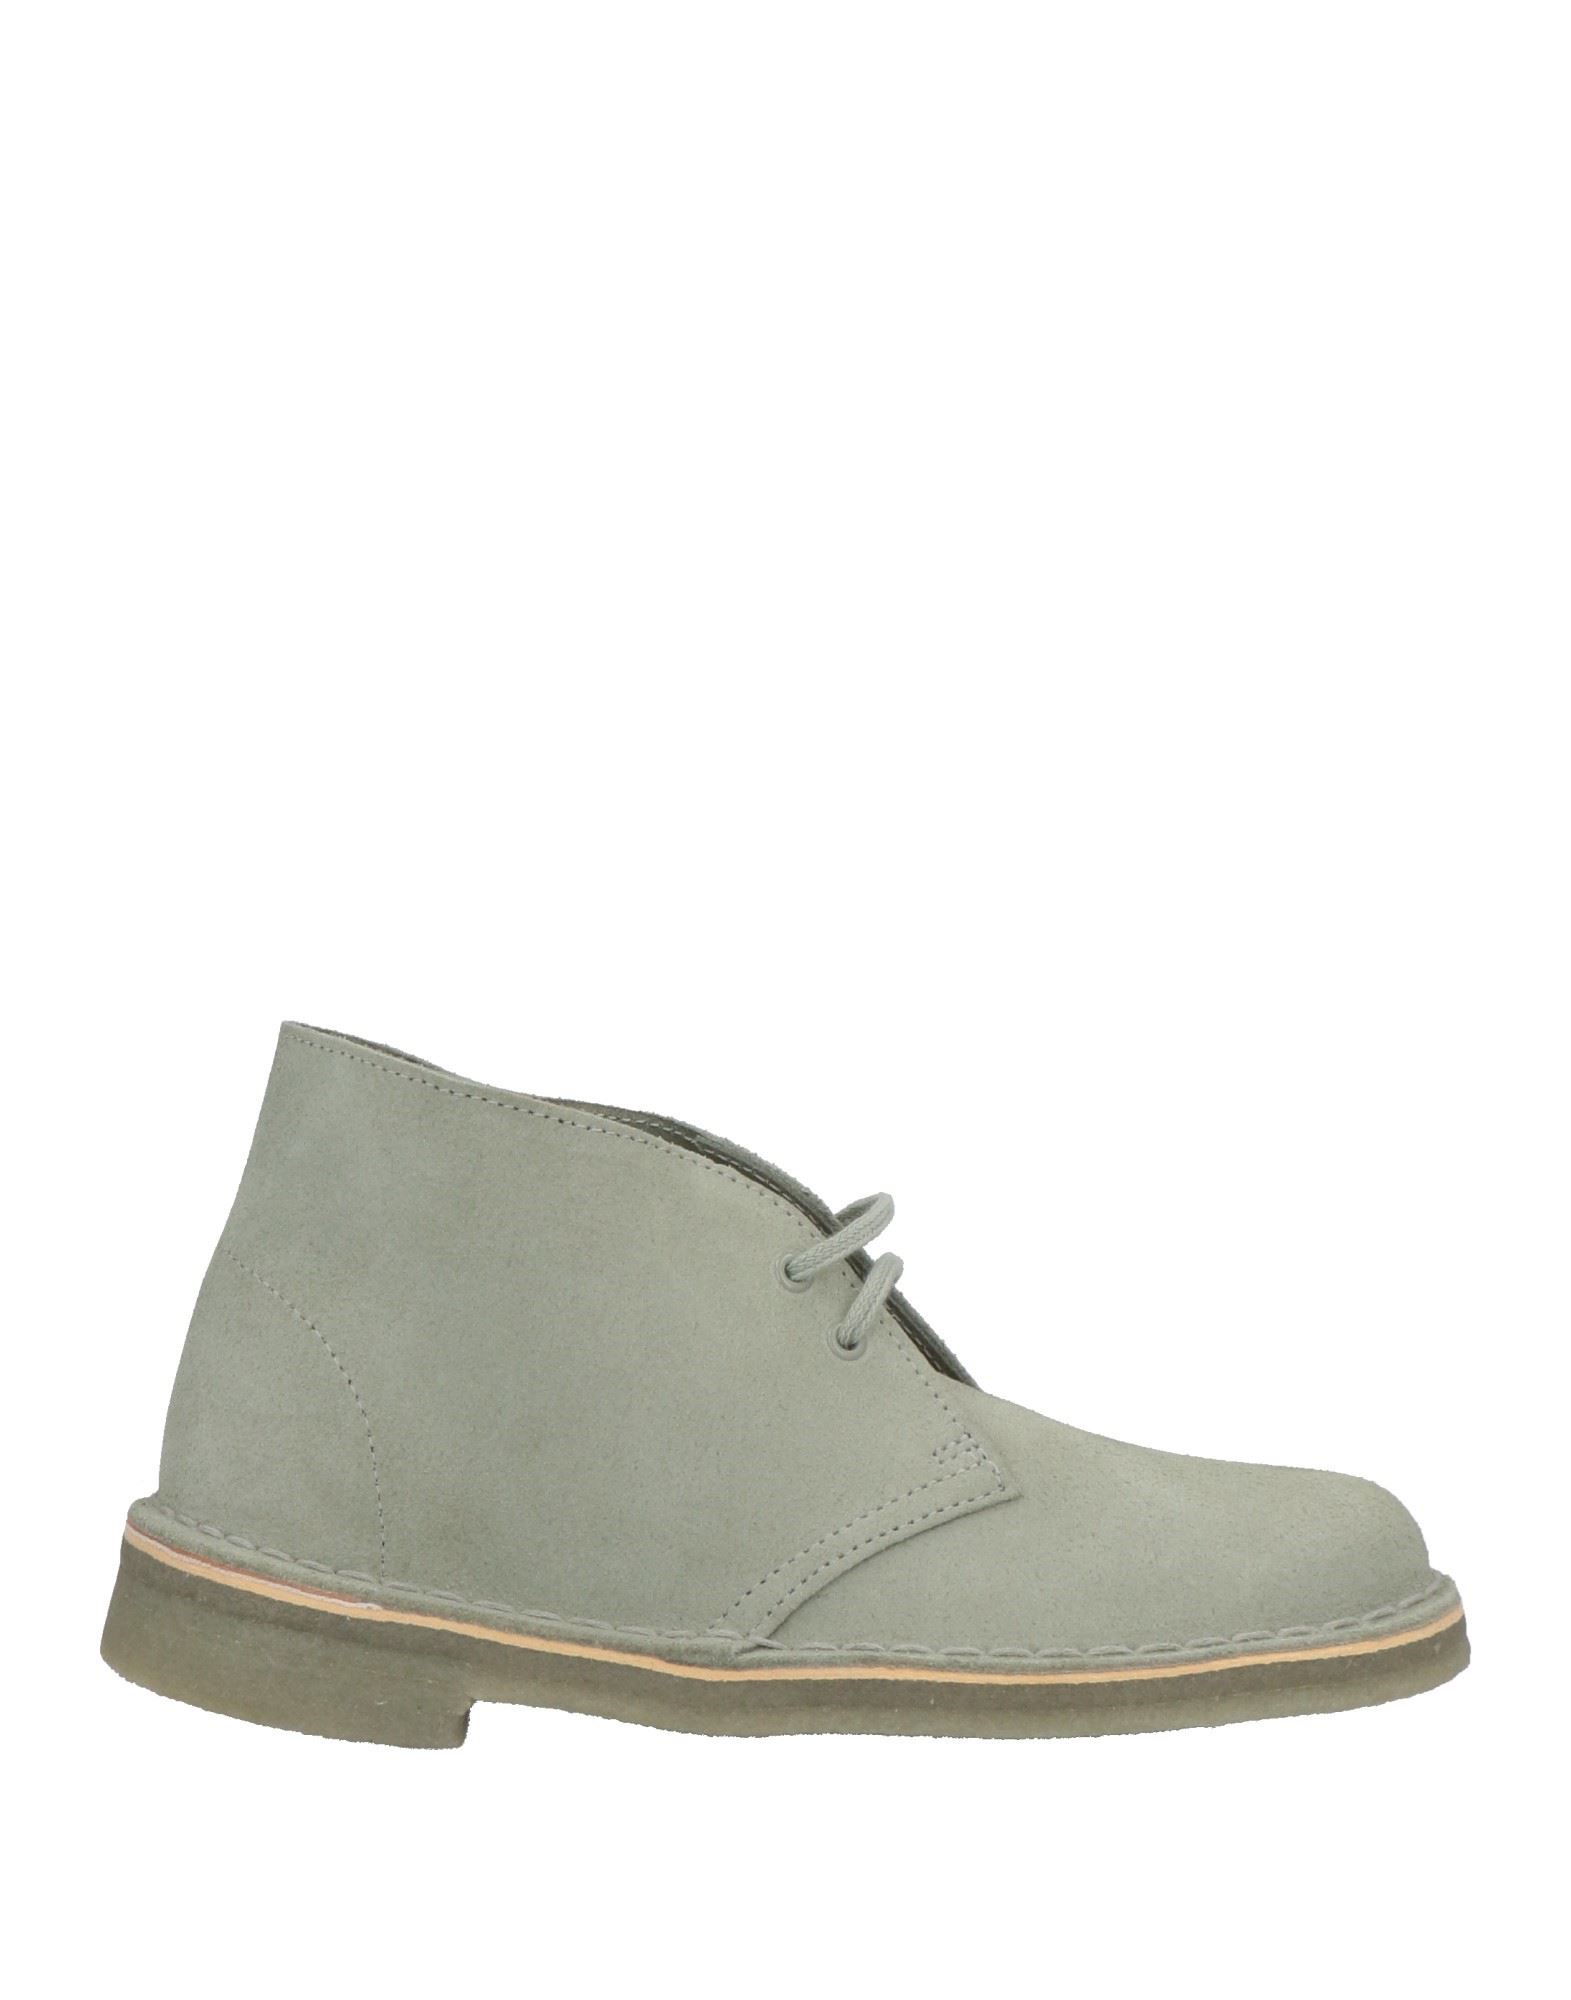 Clarks Originals Ankle Boots In Sage Green